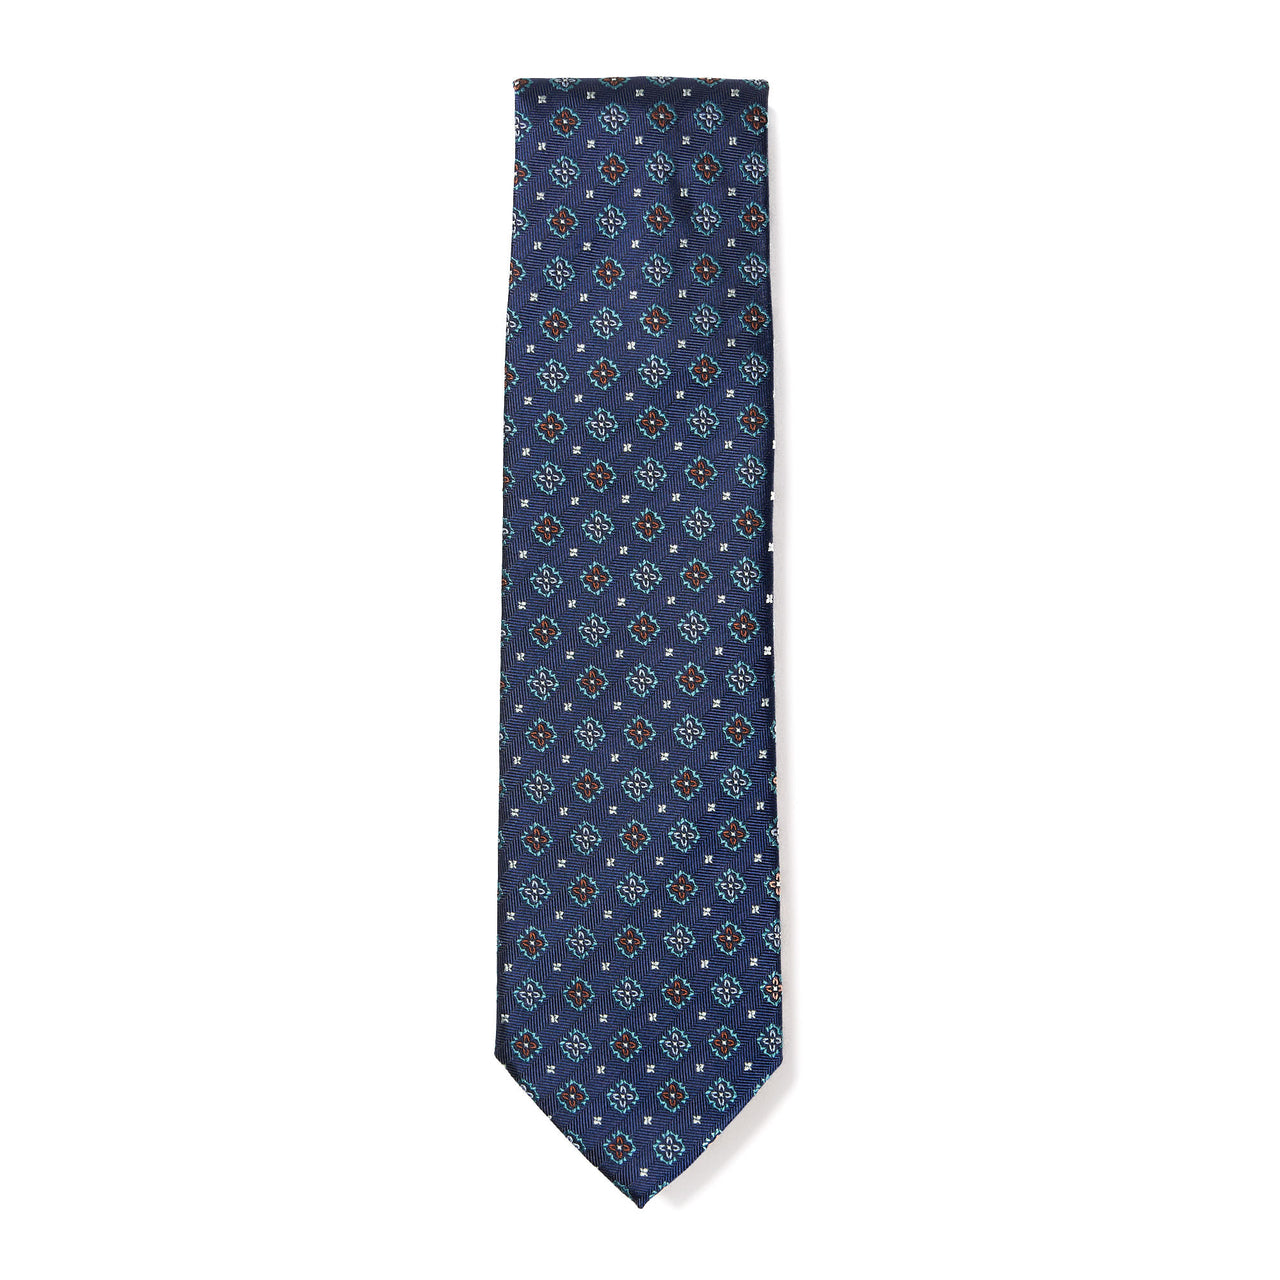 HENRY SARTORIAL X CANTINI Woven Silk Tie NAVY/TEAL